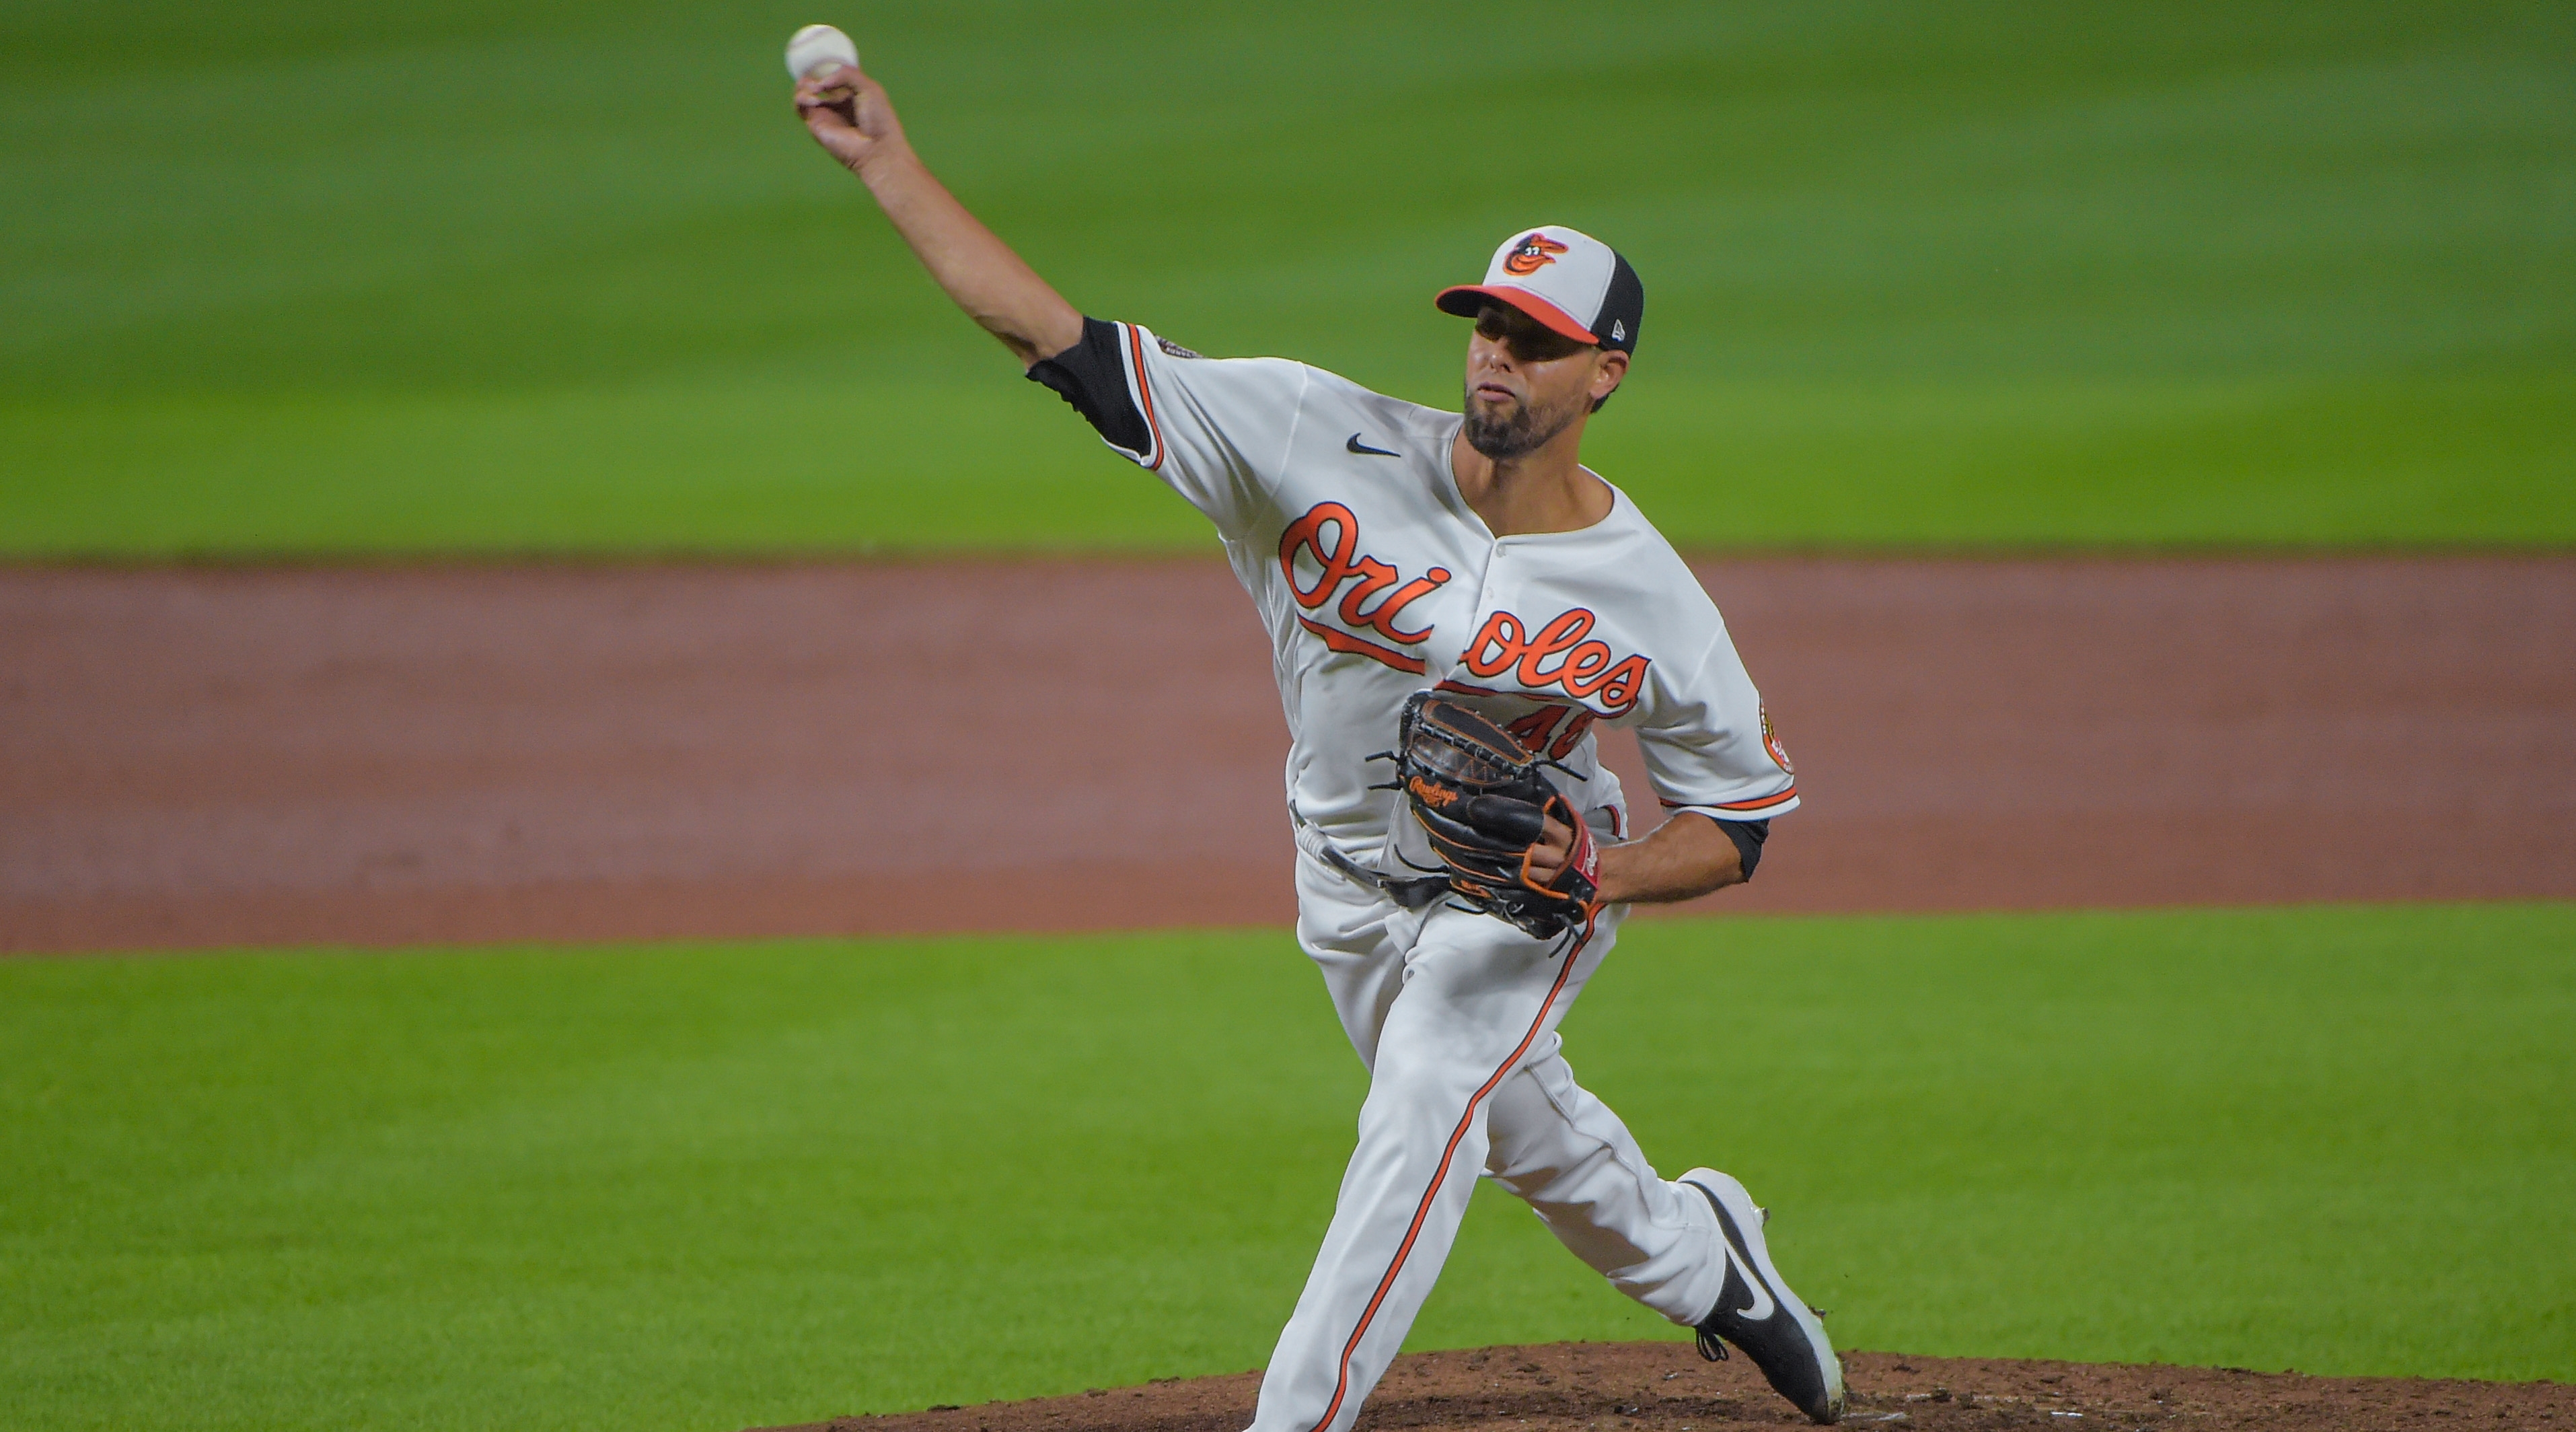 Orioles closer Jorge López acquired by Minnesota Twins